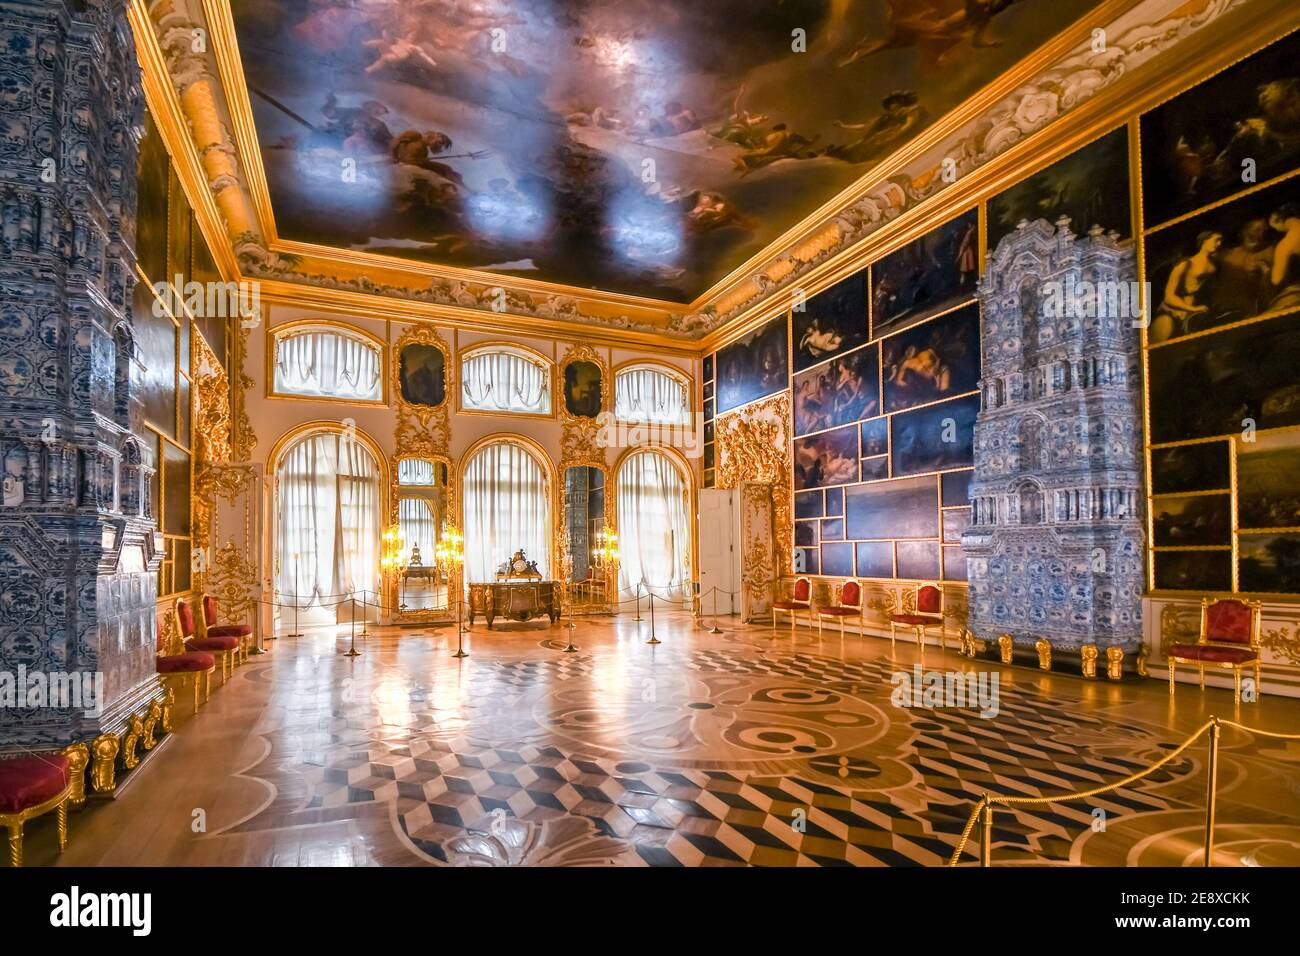 An ornate golden interior ballroom picture hall with inside the Rococo Catherine Palace near St. Petersburg, Russia. Stock Photo